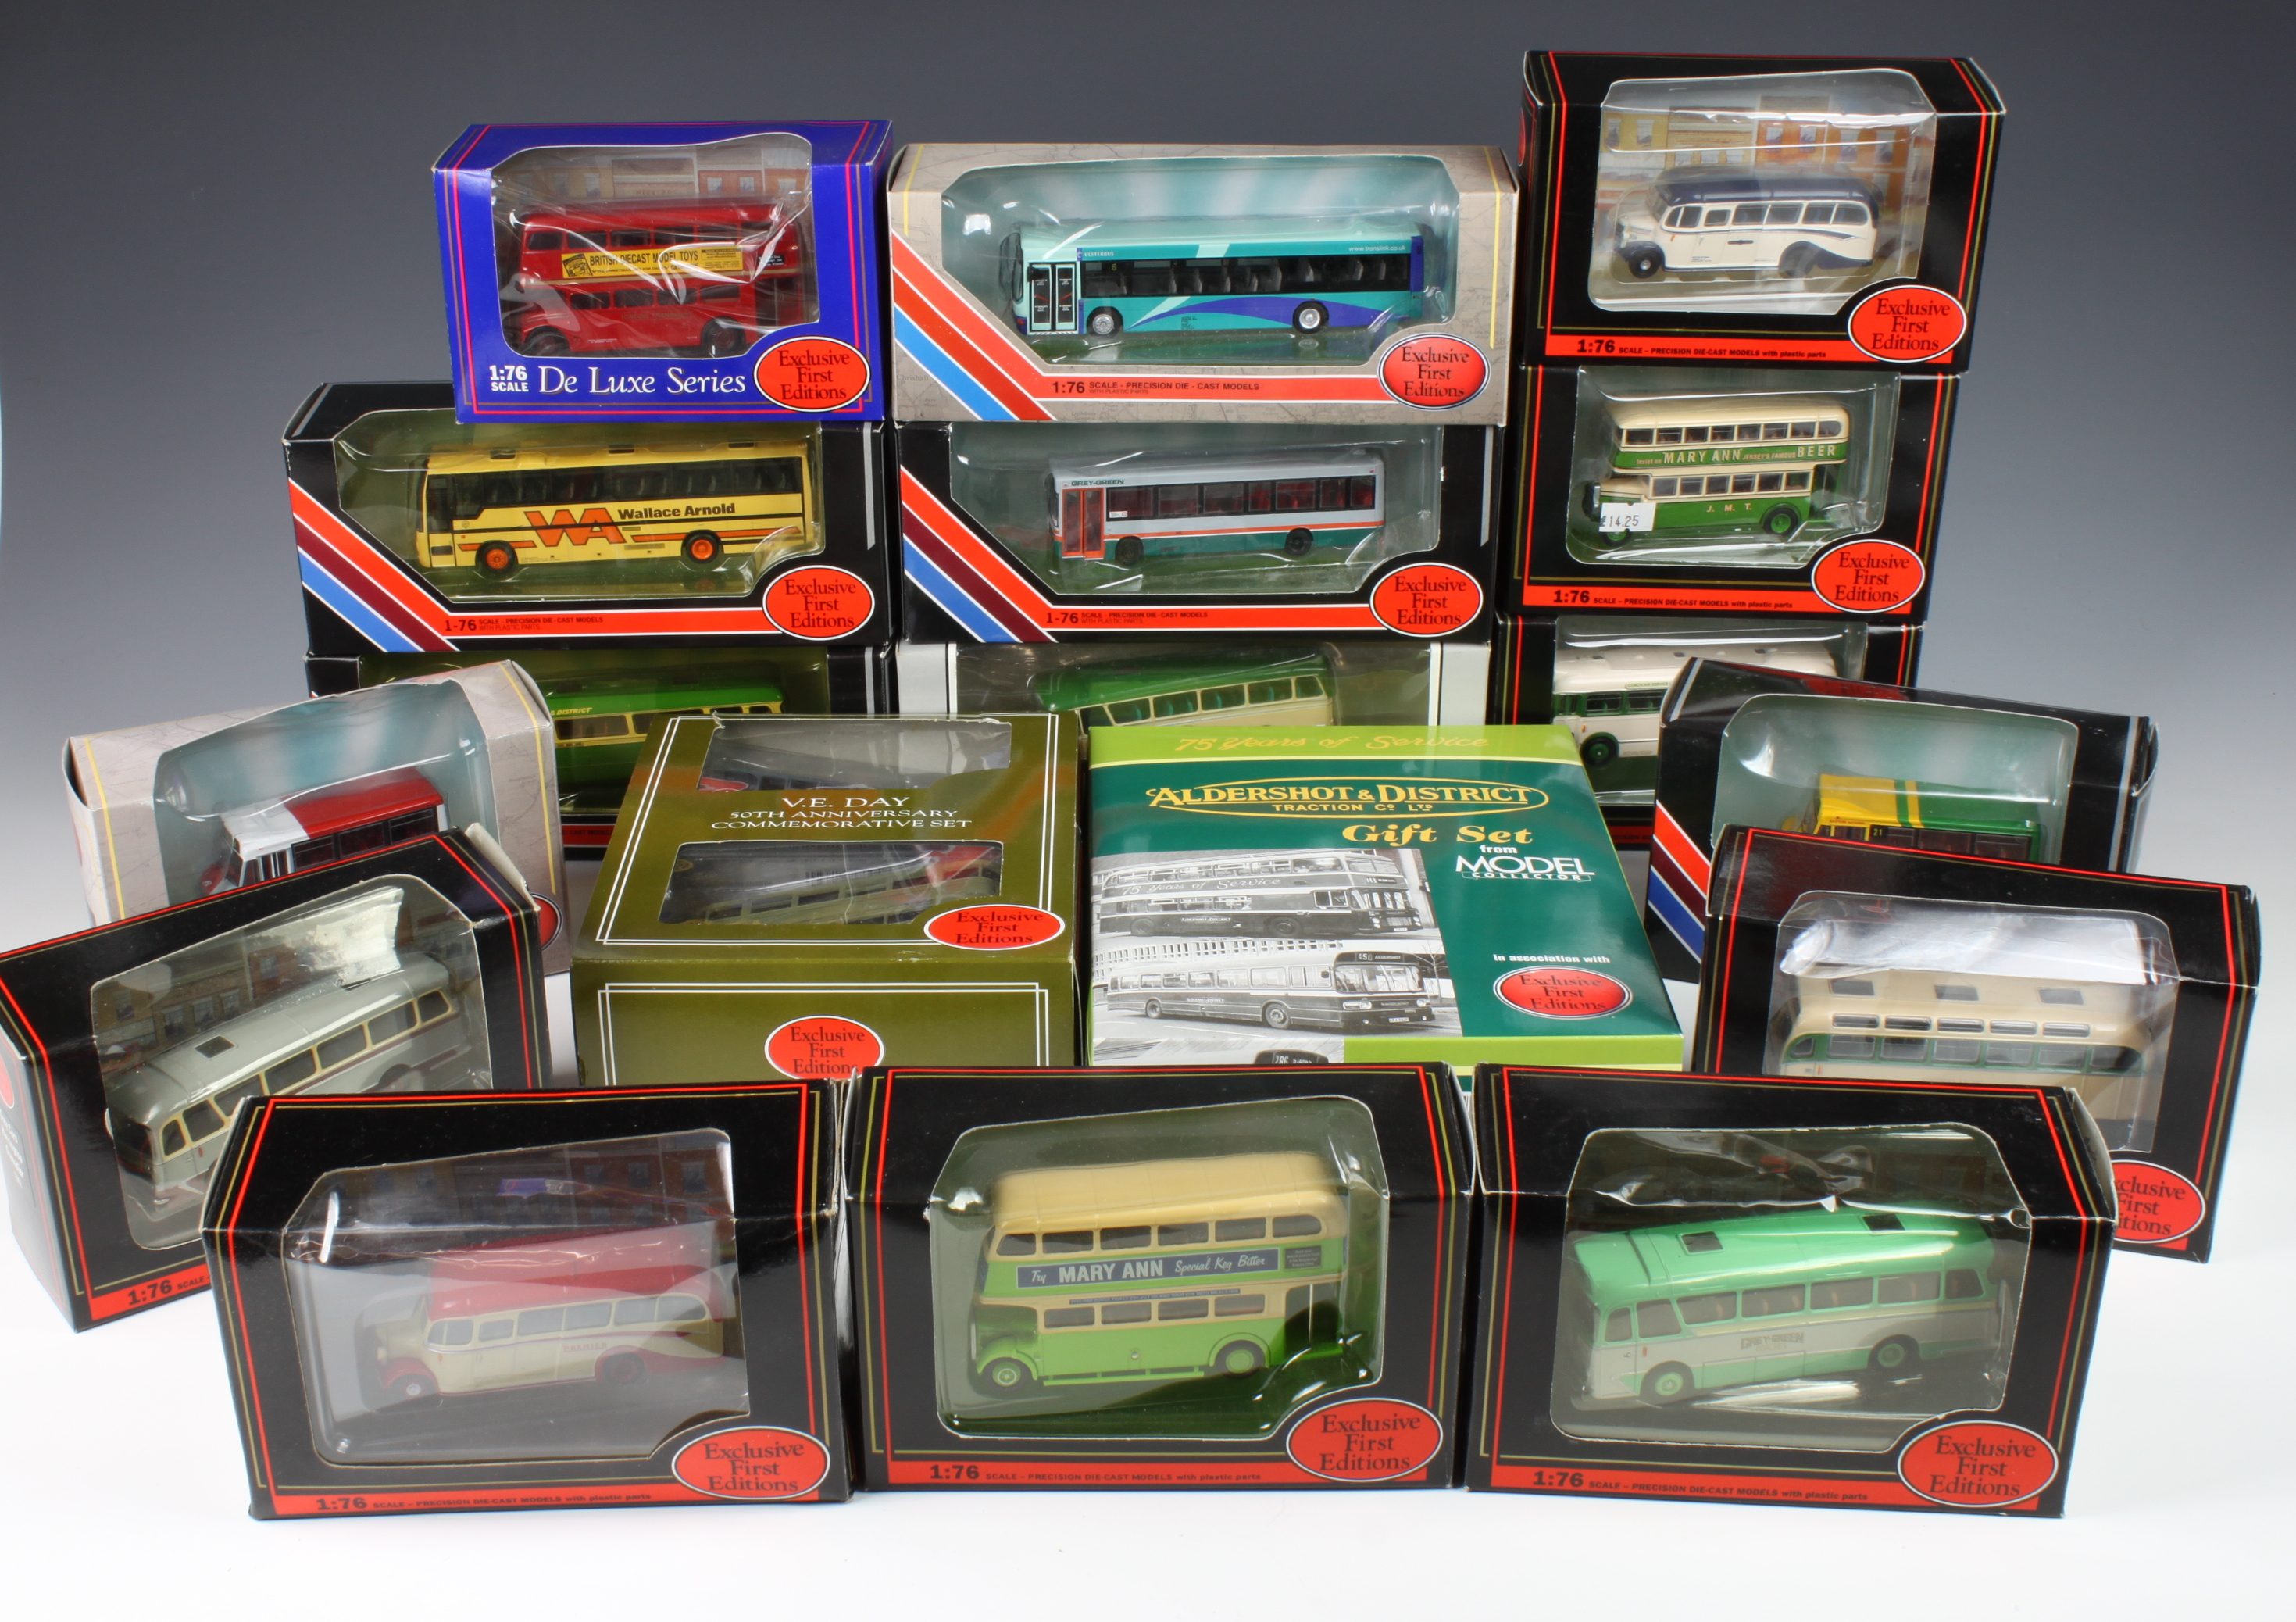 Exclusive First Editions - Twenty four boxed diecast Buses, to include The Rank Hovis Story & The R.